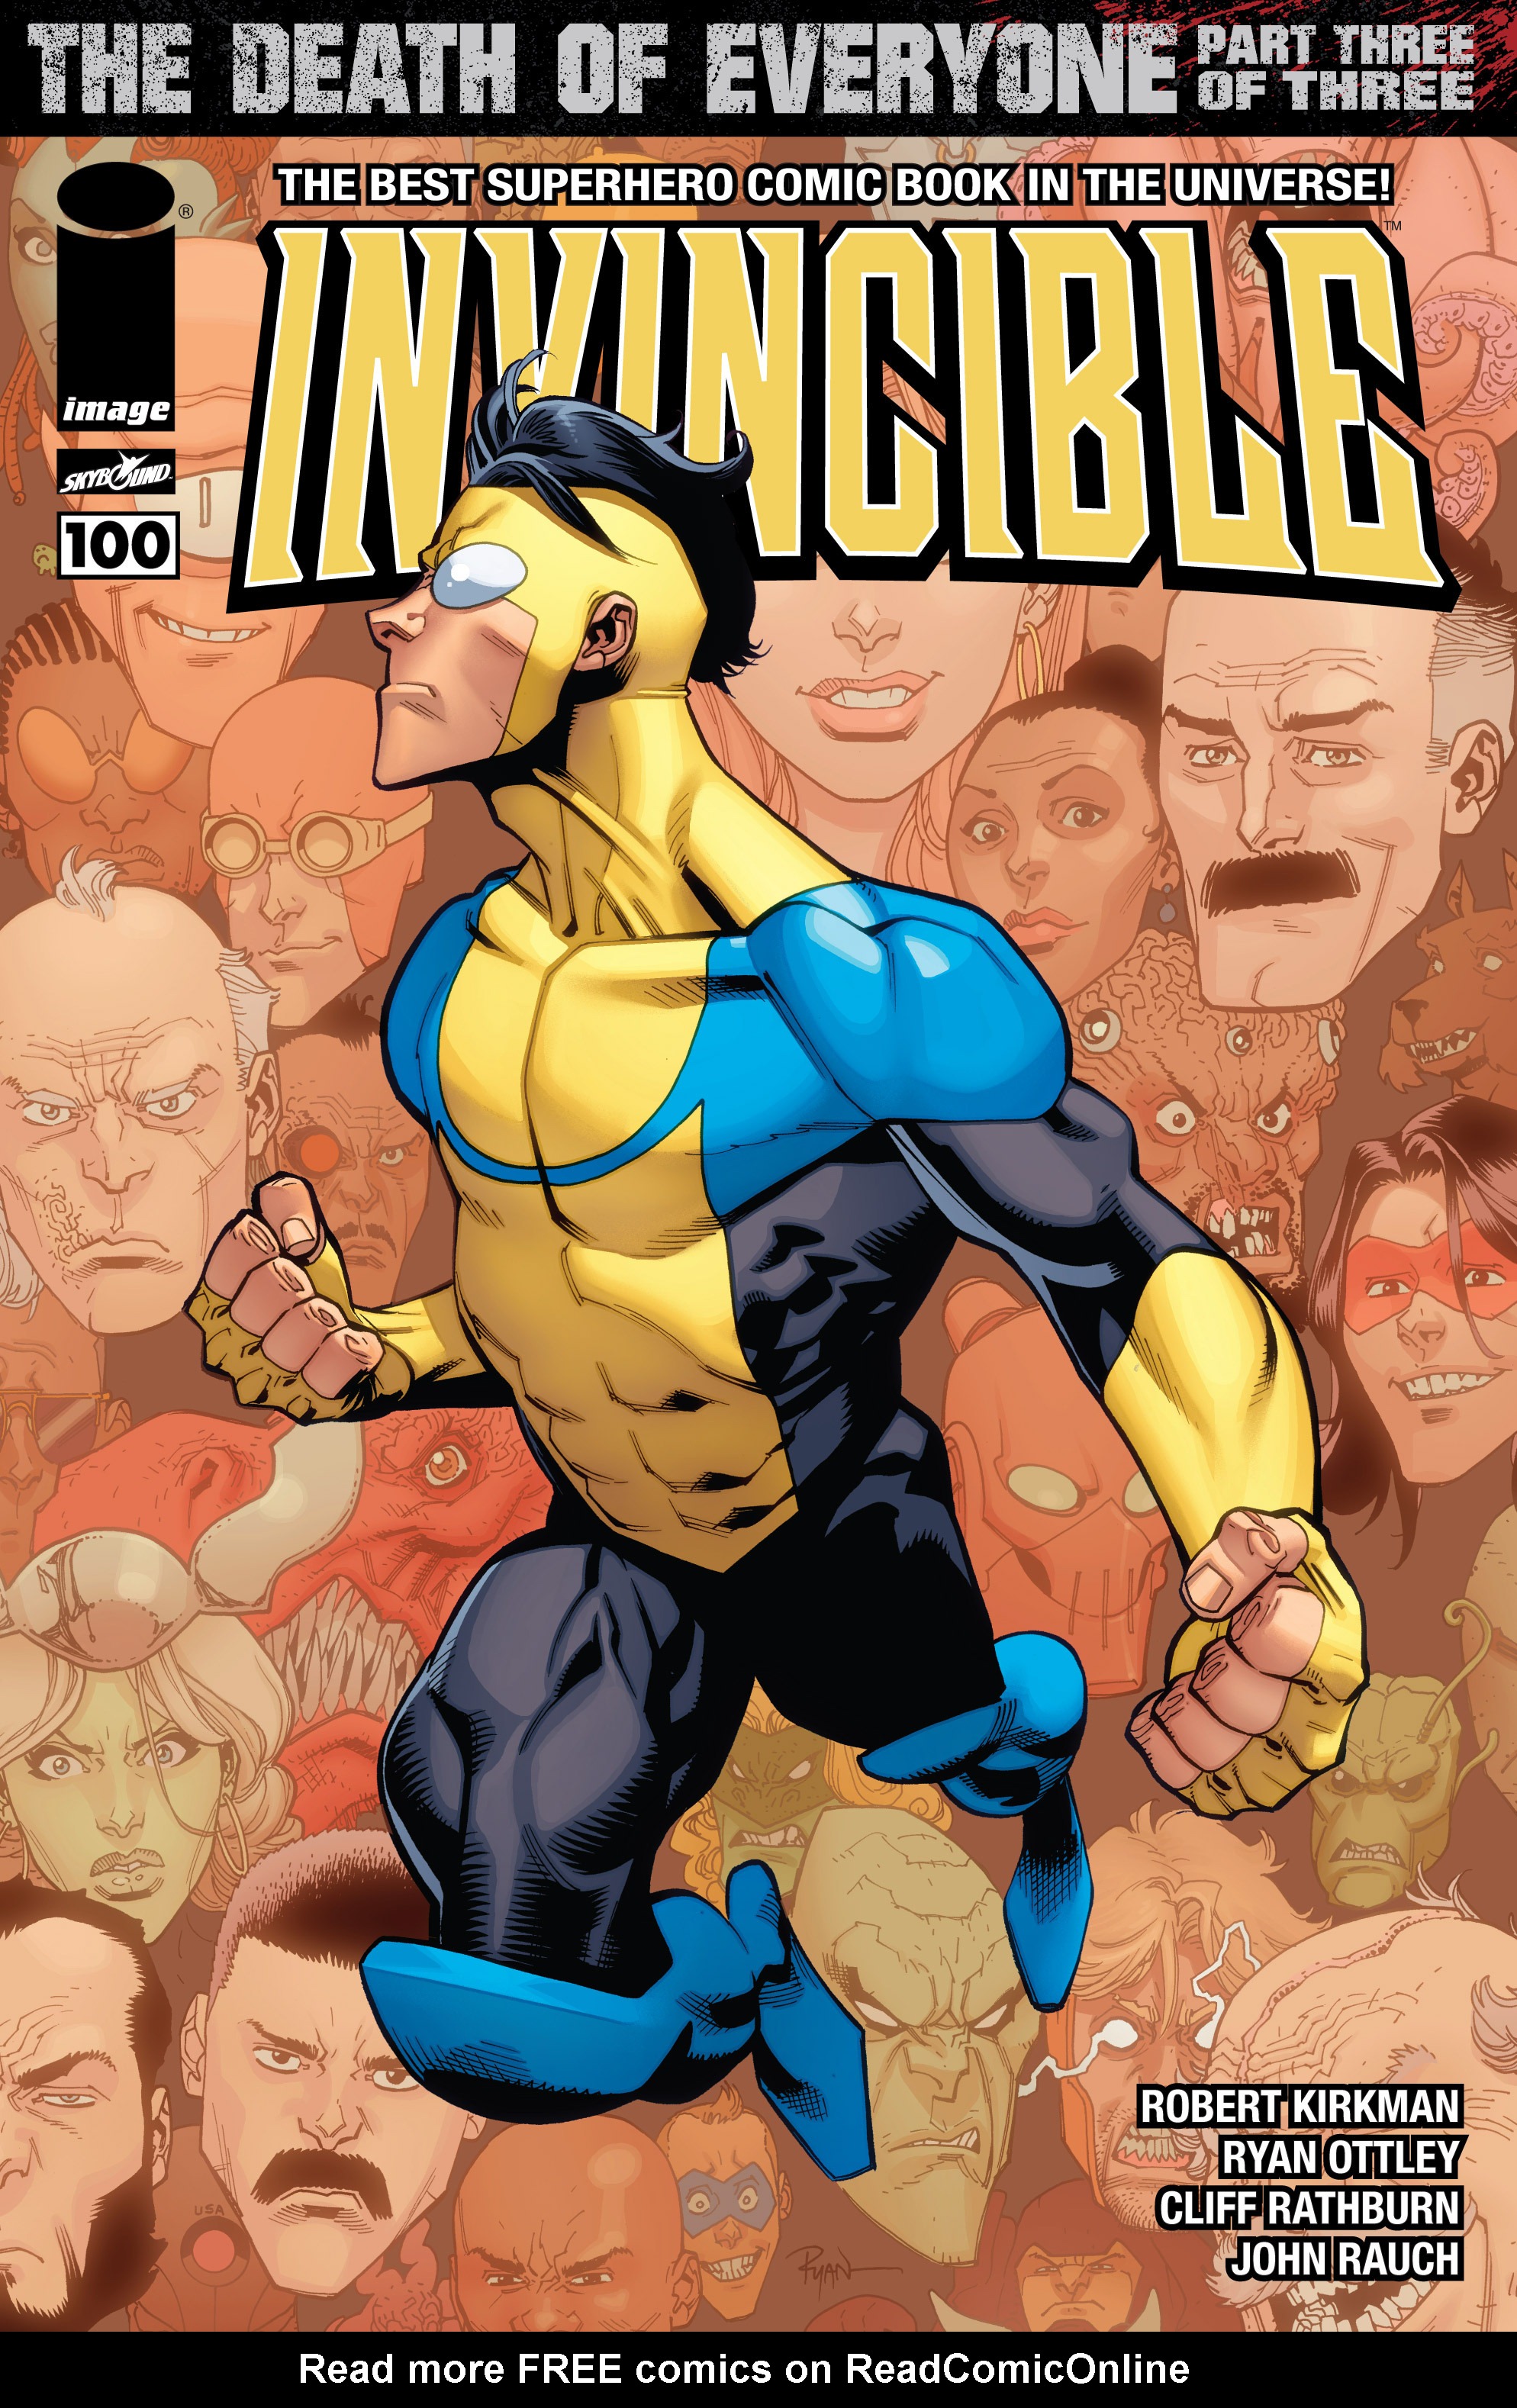 Read online Invincible comic - Issue #100.